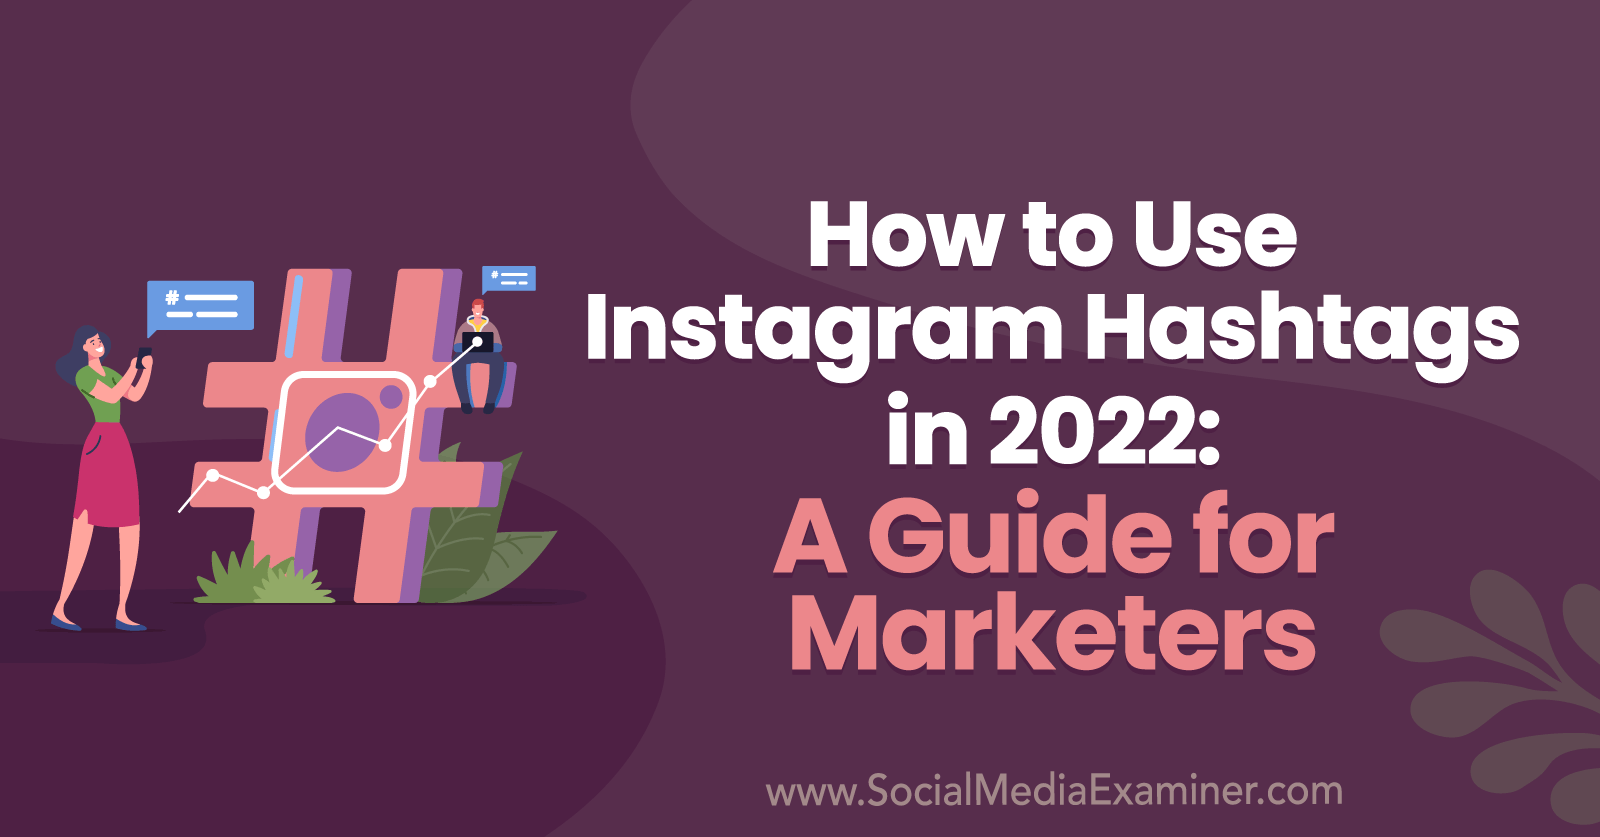 How to Use Instagram Hashtags in 2022: A Guide for Marketers by Anna Sonnenberg on Social Media Examiner.